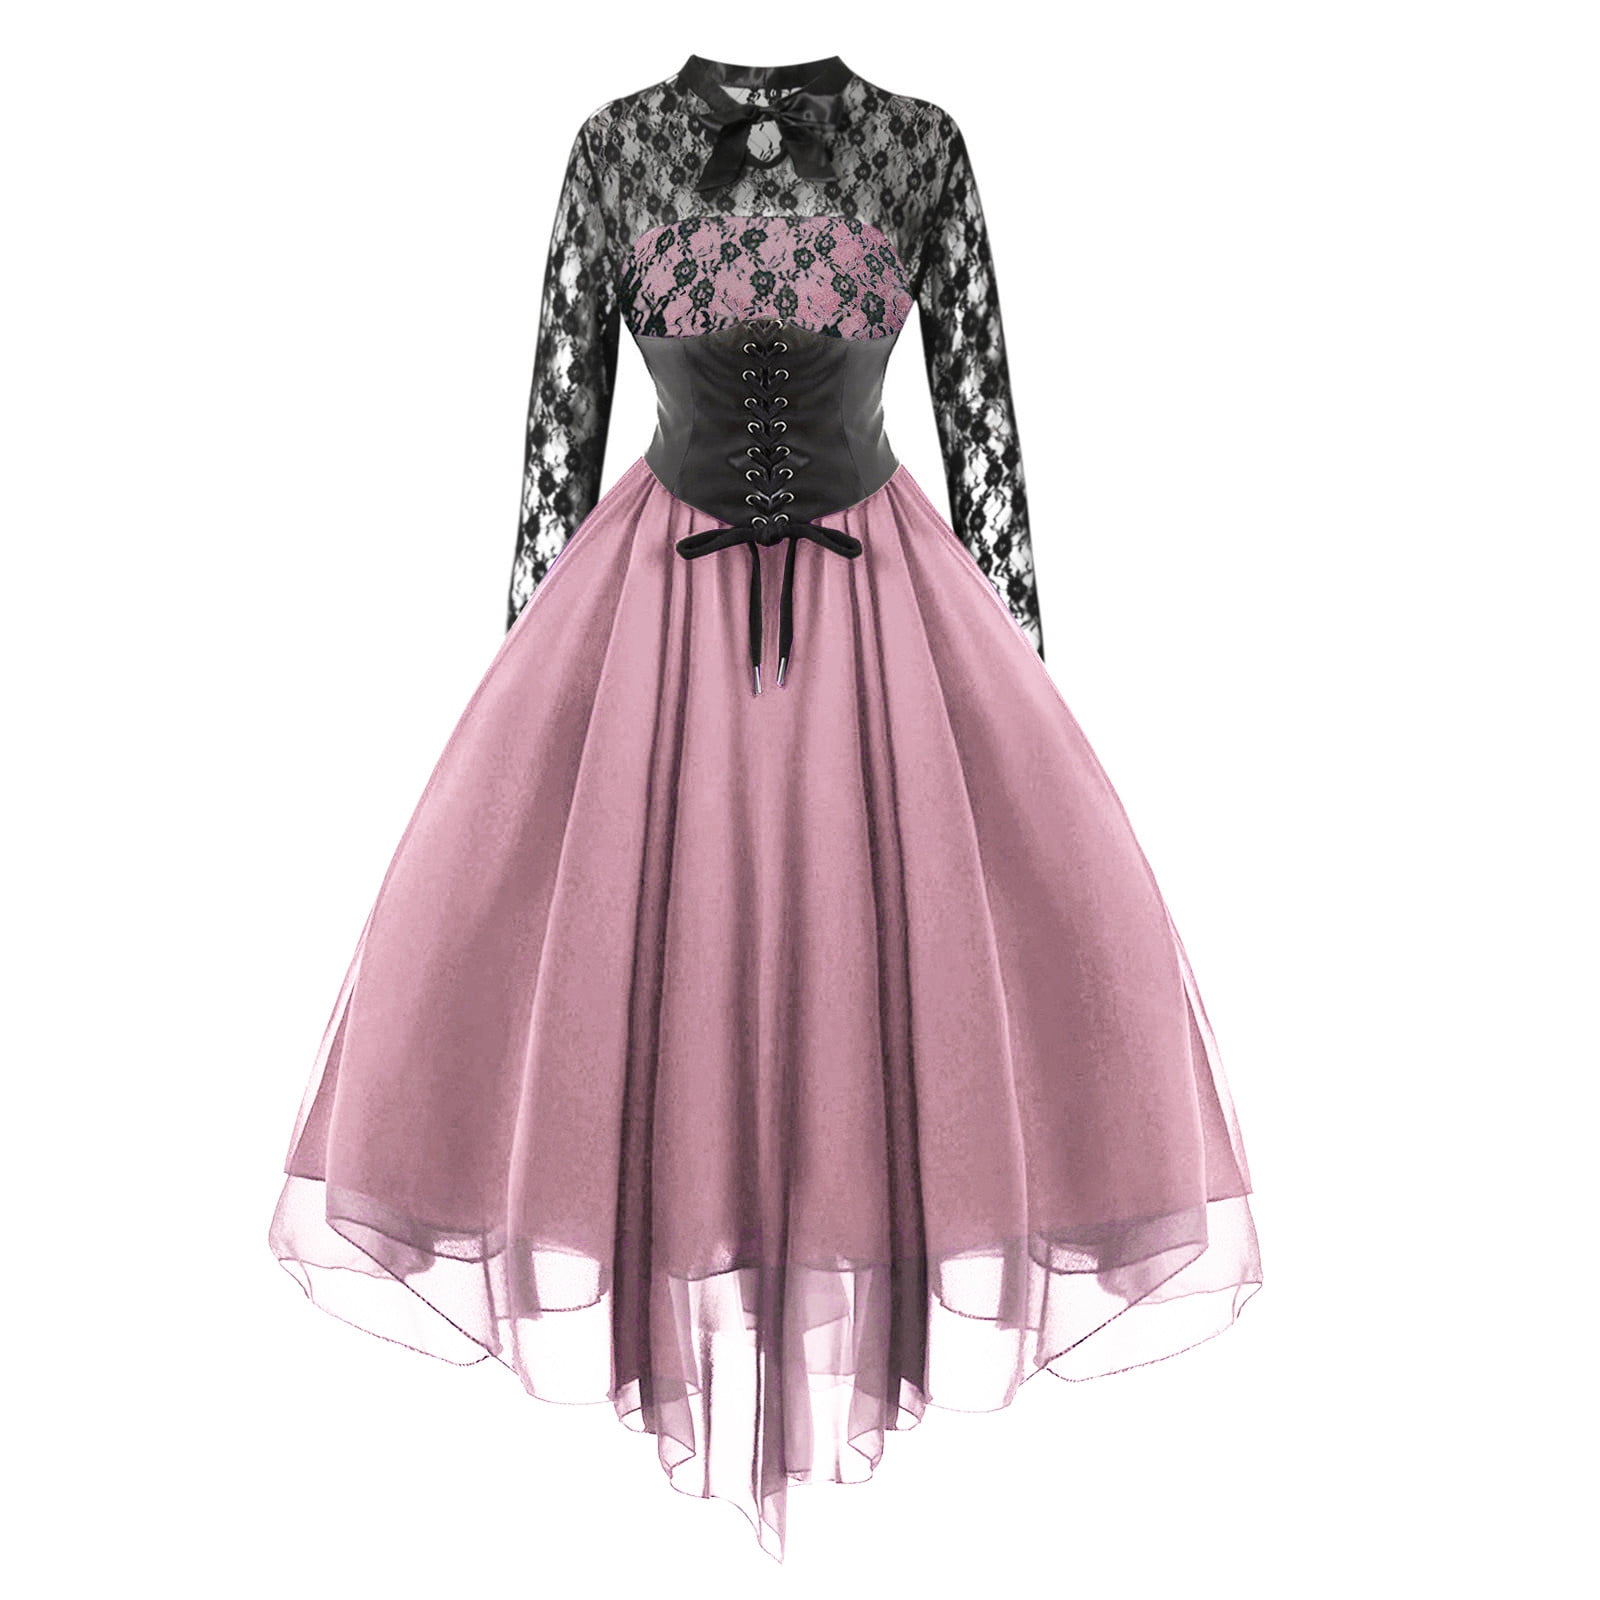 Sweet and Pastel Gothic Clothes of Daily Wear.